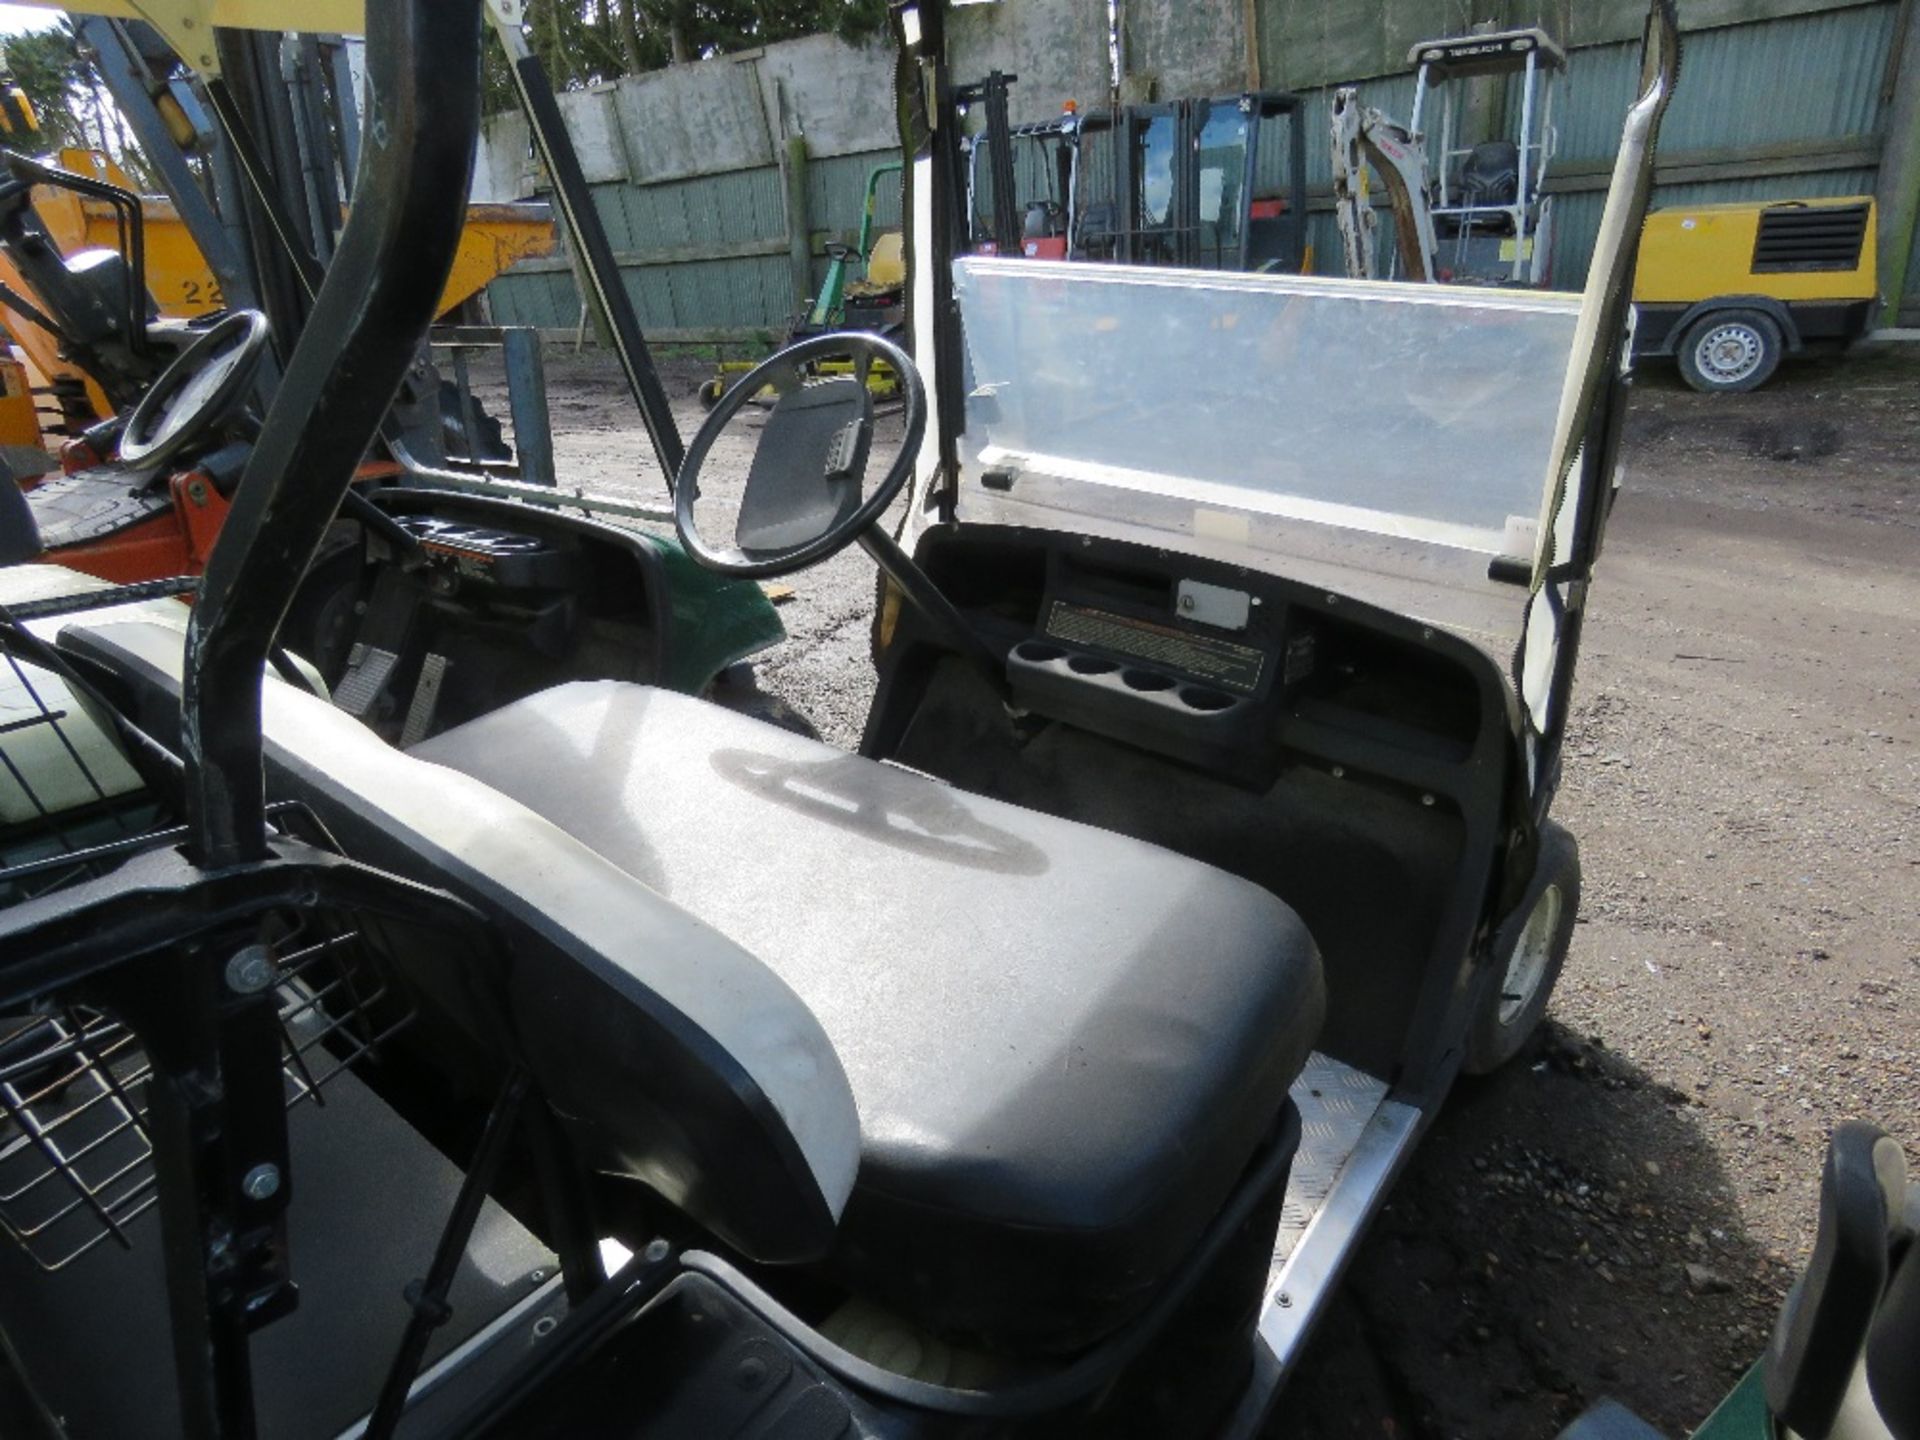 EZGO PETROL ENGINED GOLF BUGGY. BLACK COLOURED. WHEN TESTED WAS SEEN TO RUN, DRIVE, STEER AND BRAKE. - Image 5 of 7